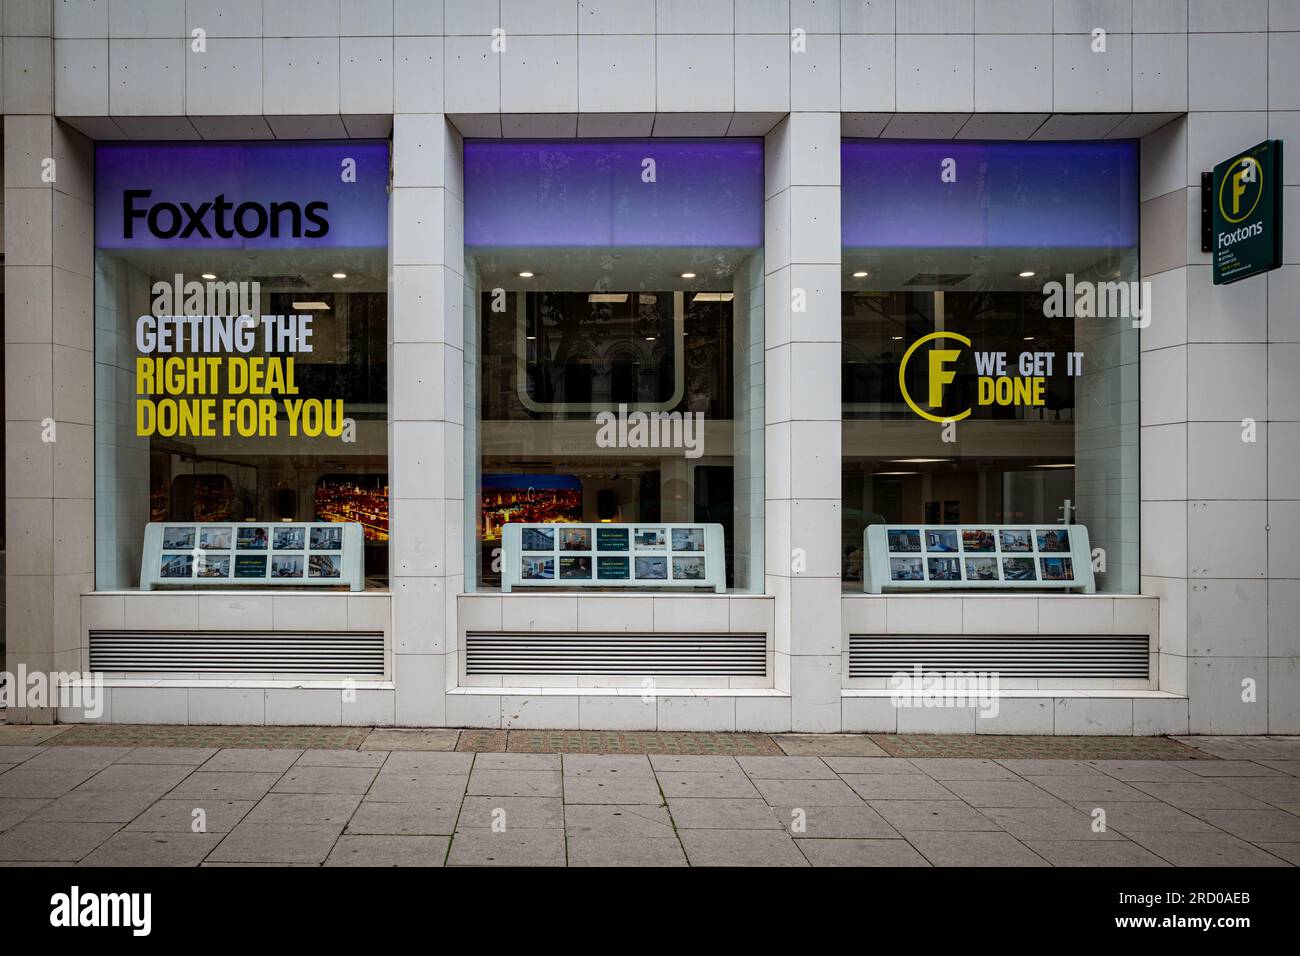 Foxtons London - Foxtons Estate Agency Offices on High Holborn in Central London. Foxtons Group plc. Founded 1981. Stock Photo